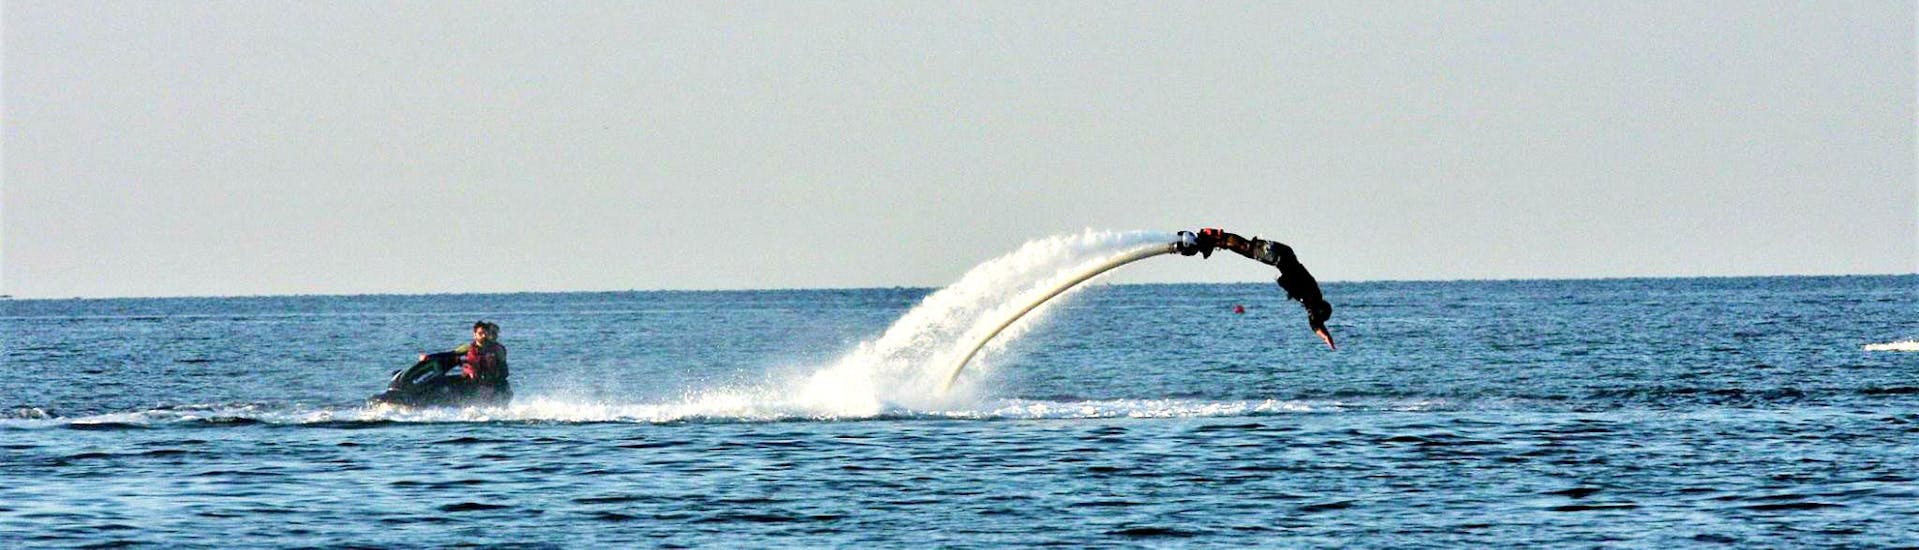 A customer from the Gliss1Flo Watersport Centre flyboarding in the beautiful bay of Saint-Florent.